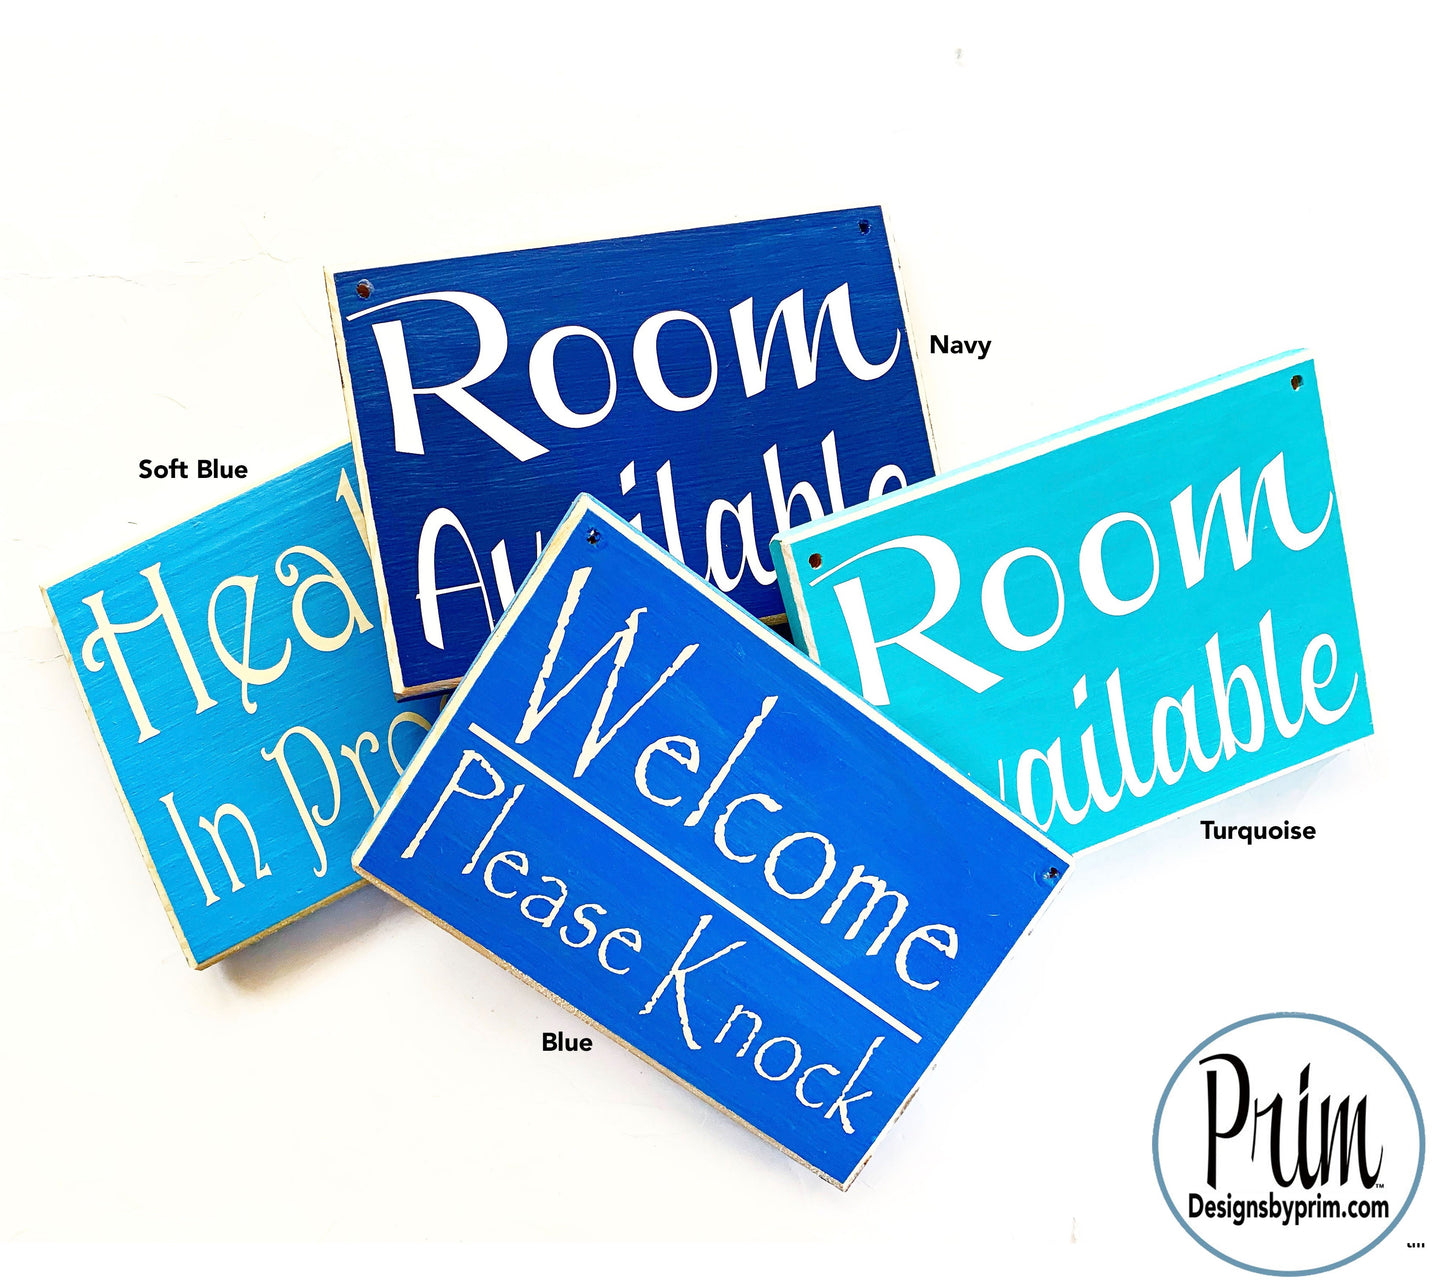 Designs by Prim 10x8 STOP Meeting In Progress Please Do Not Disturb Custom Wood Sign | Office Working From Home Zoom Busy In Session Virtual Door Plaque